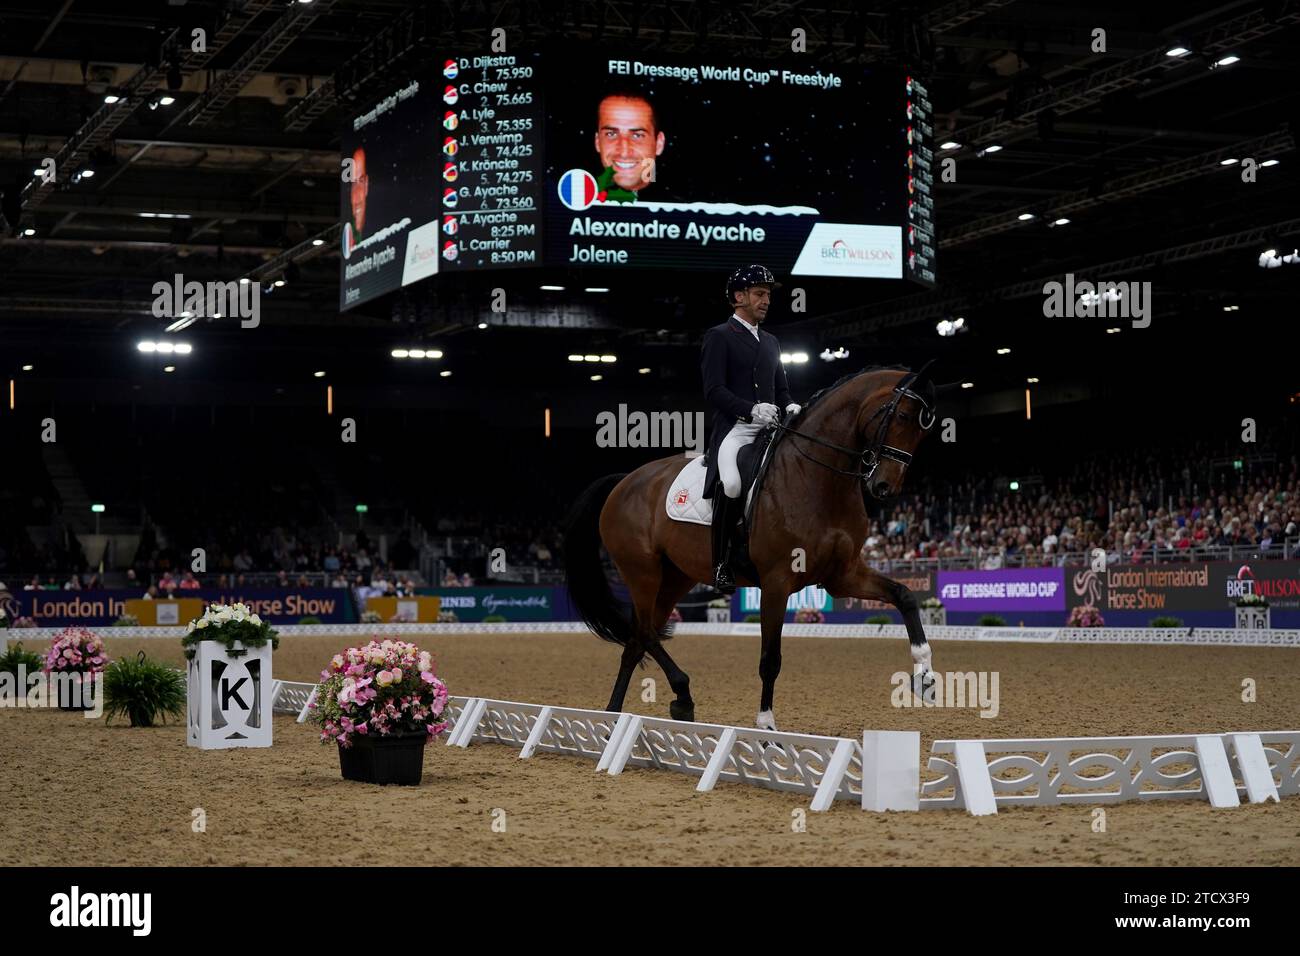 Jolene ridden by Alexandre Ayache during the FEI Dressage World Cup on day two of the London International Horse Show at ExCel London. Picture date: Thursday December 14, 2023. Stock Photo